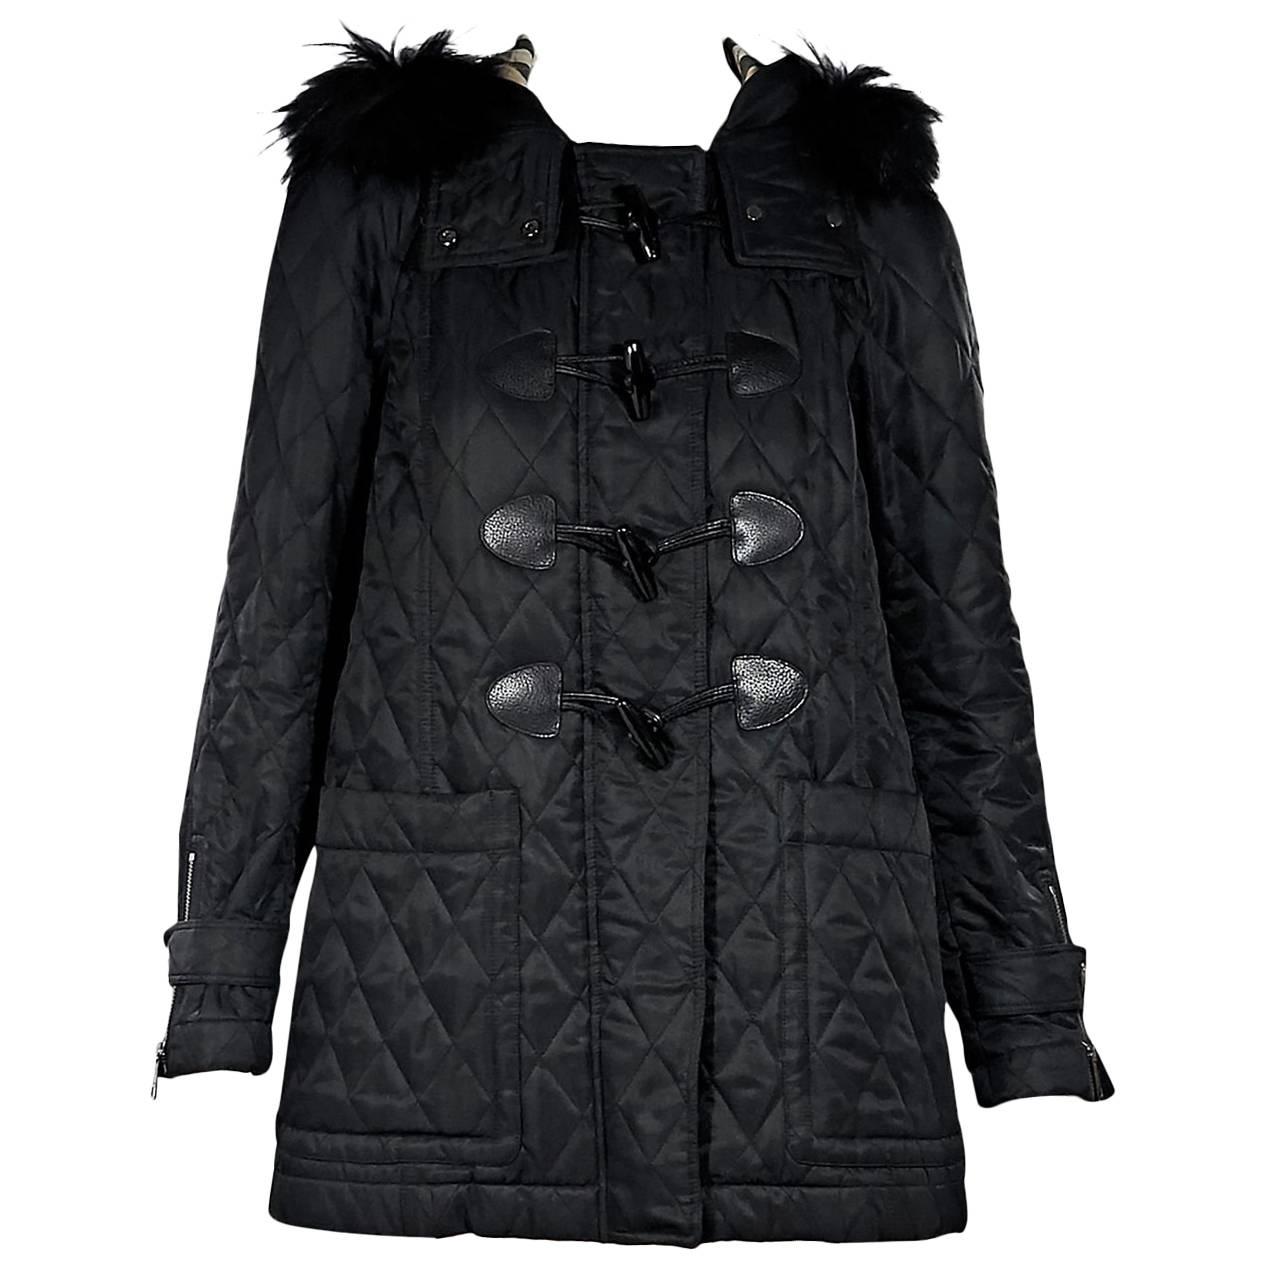 Black Burberry Brit Quilted Hooded Jacket